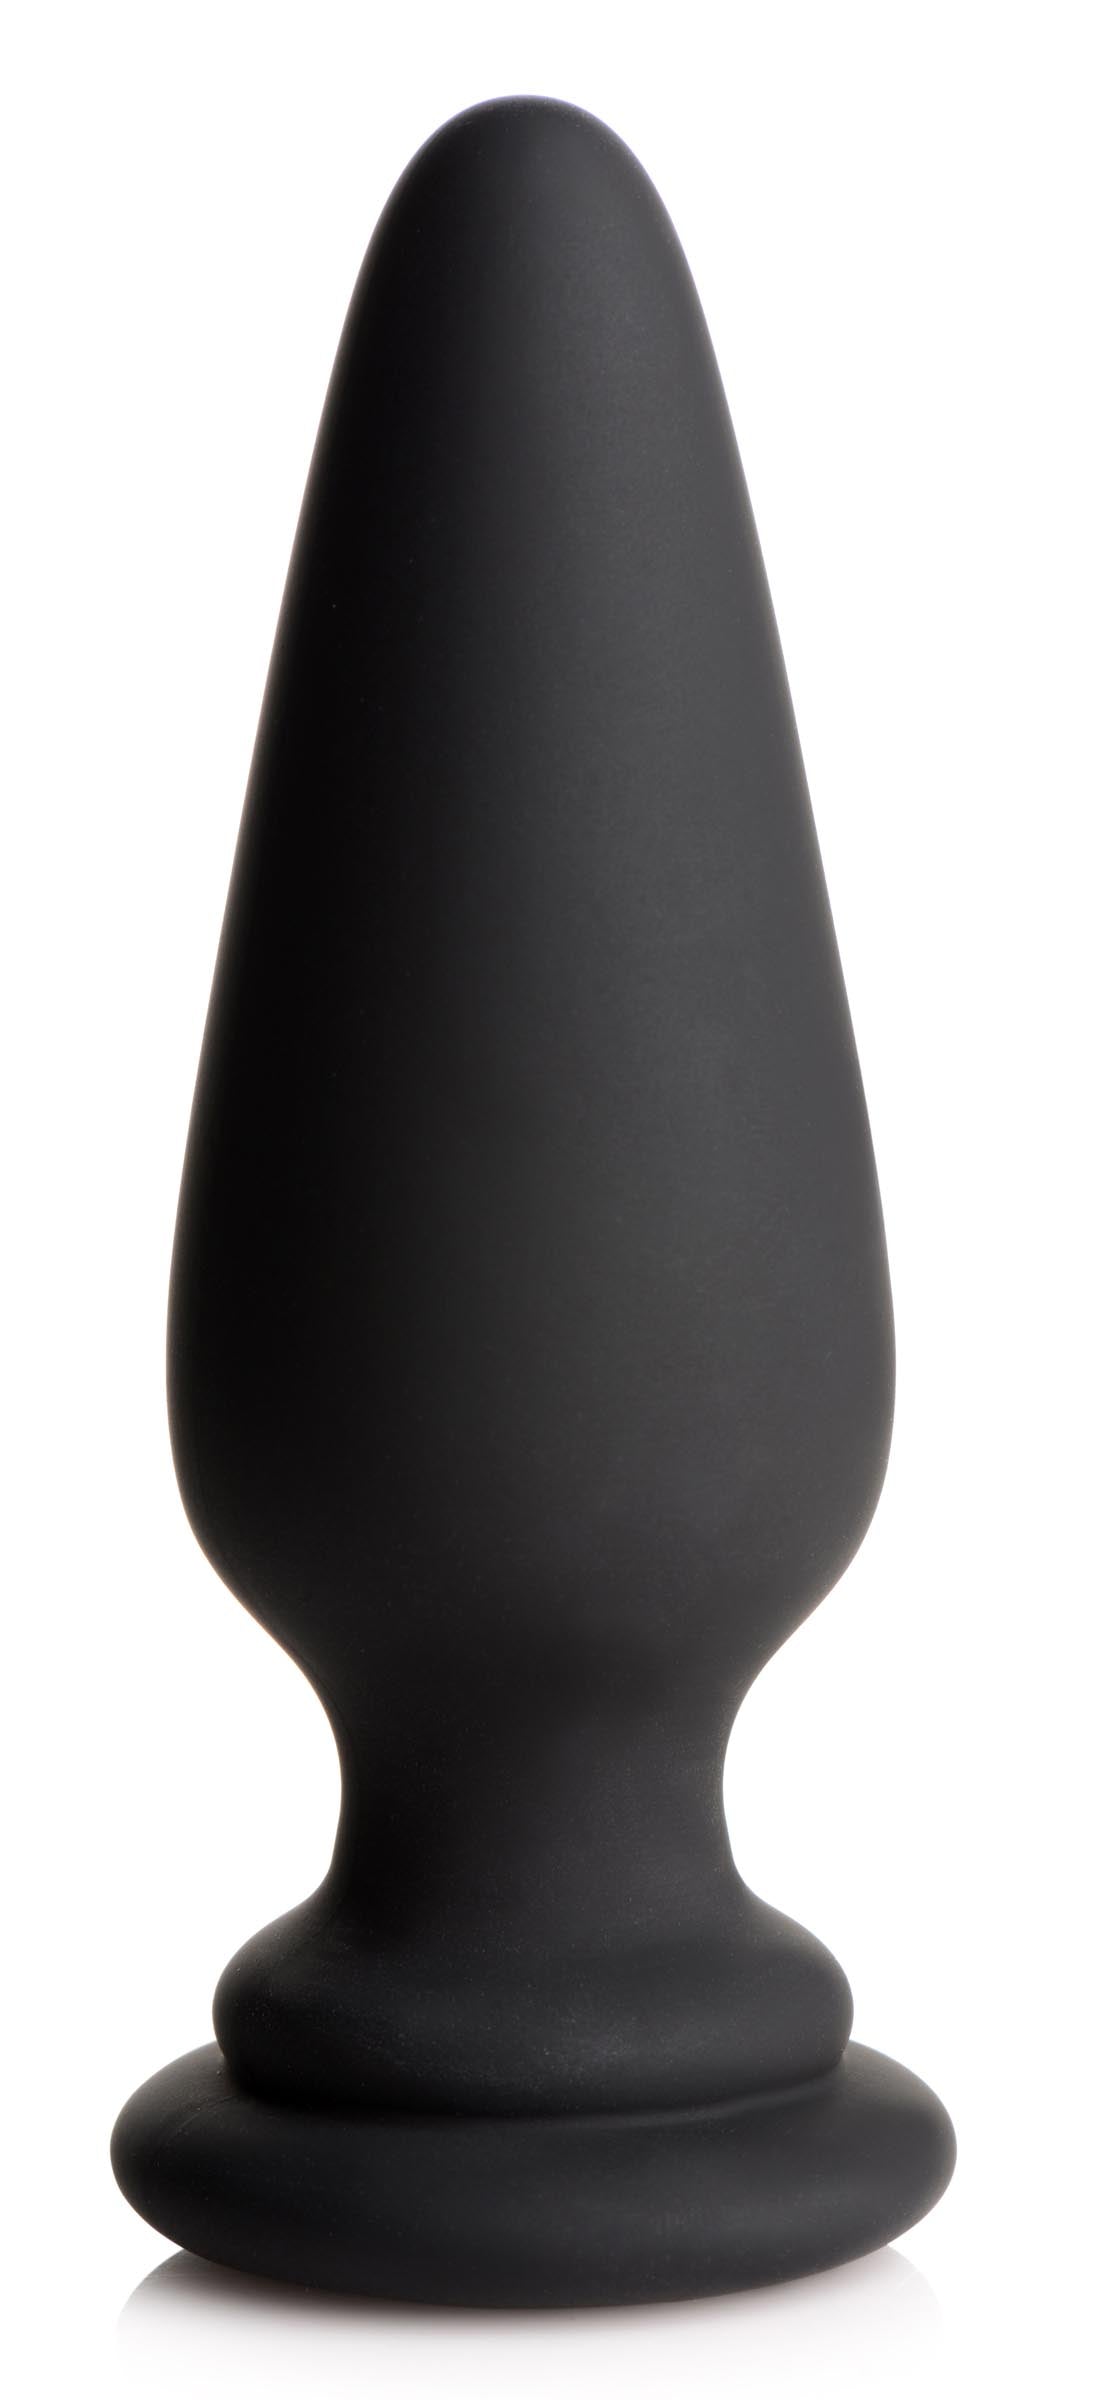 Large Anal Plug with Interchangeable Fox Tail - Black and White - UABDSM